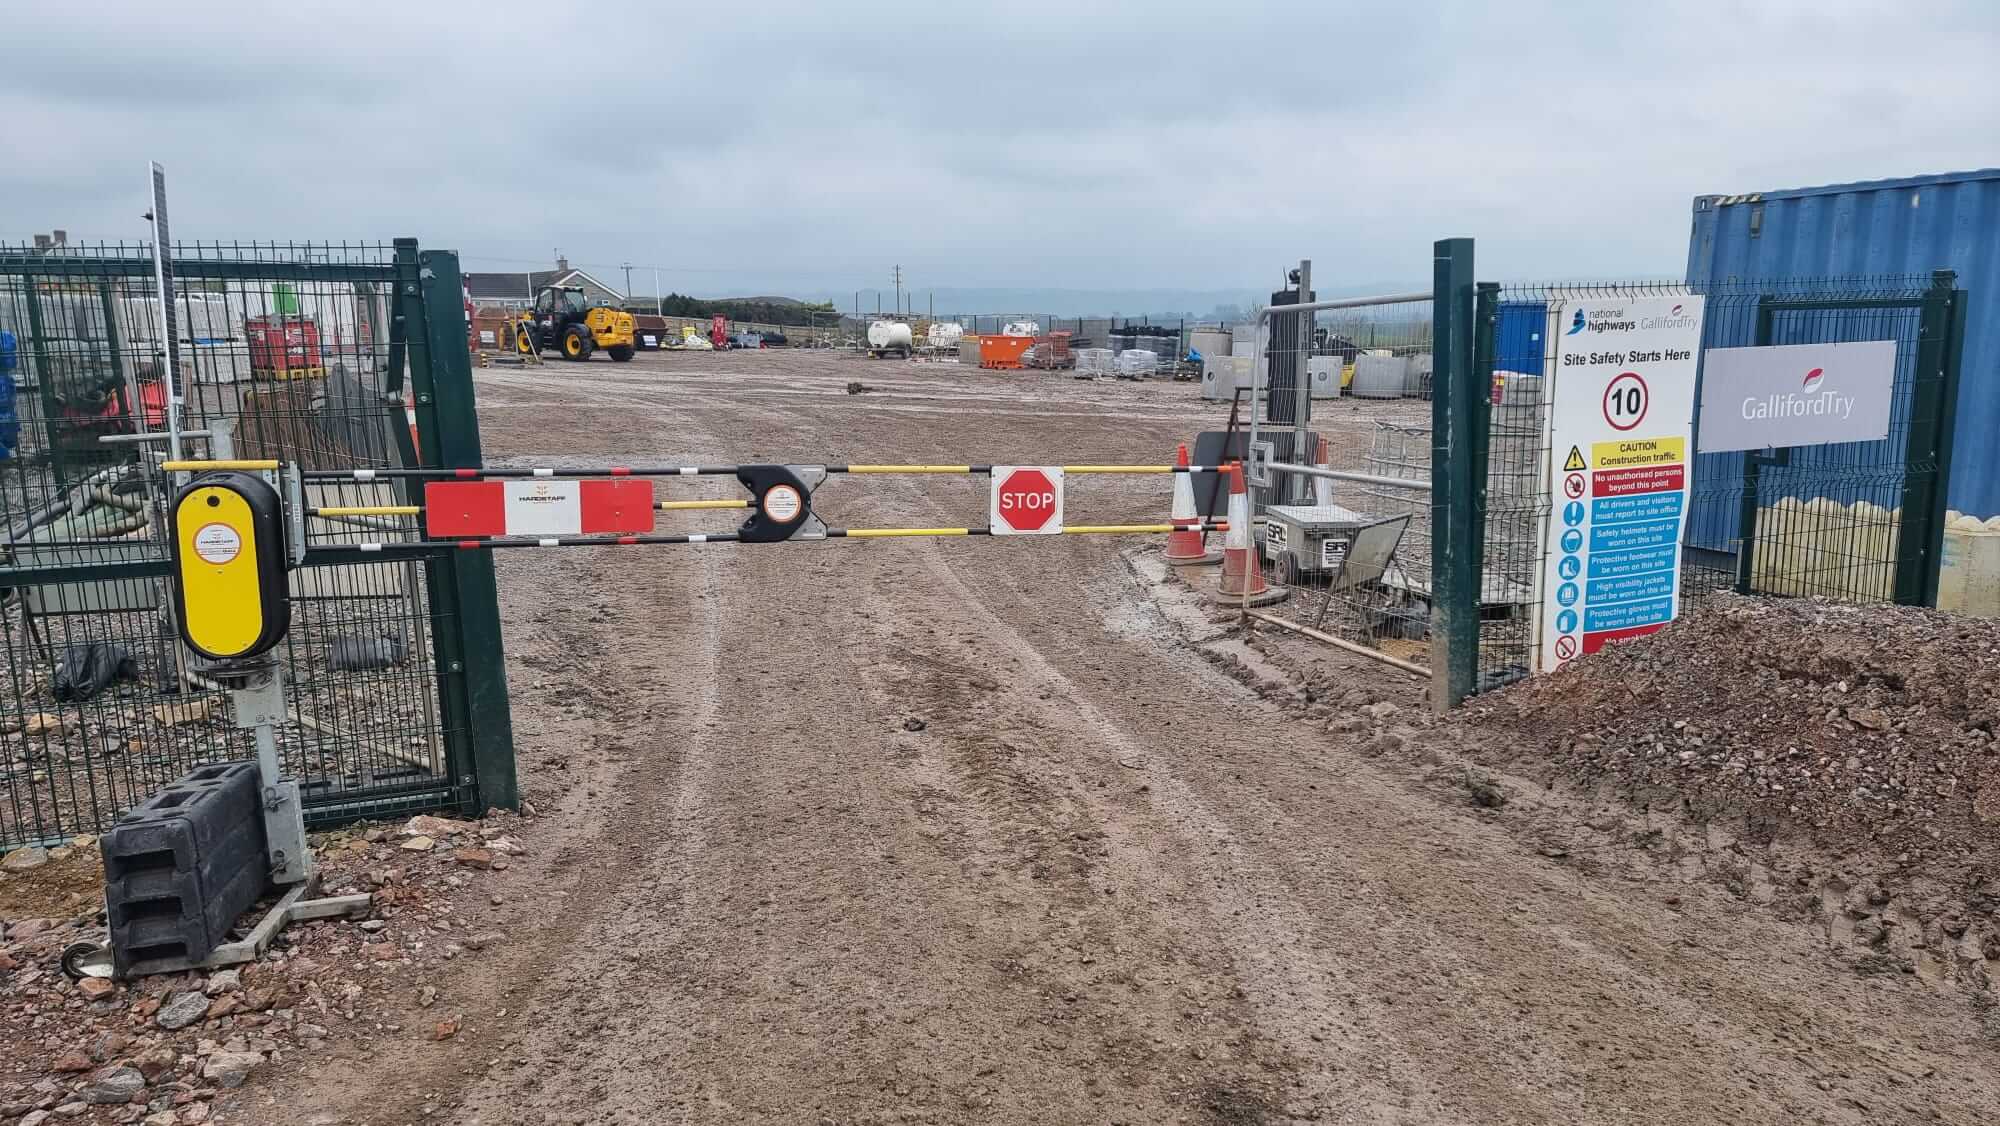 Photograph of solar powered access control Sentrigate positioned at a construction area near the A303, Somerset